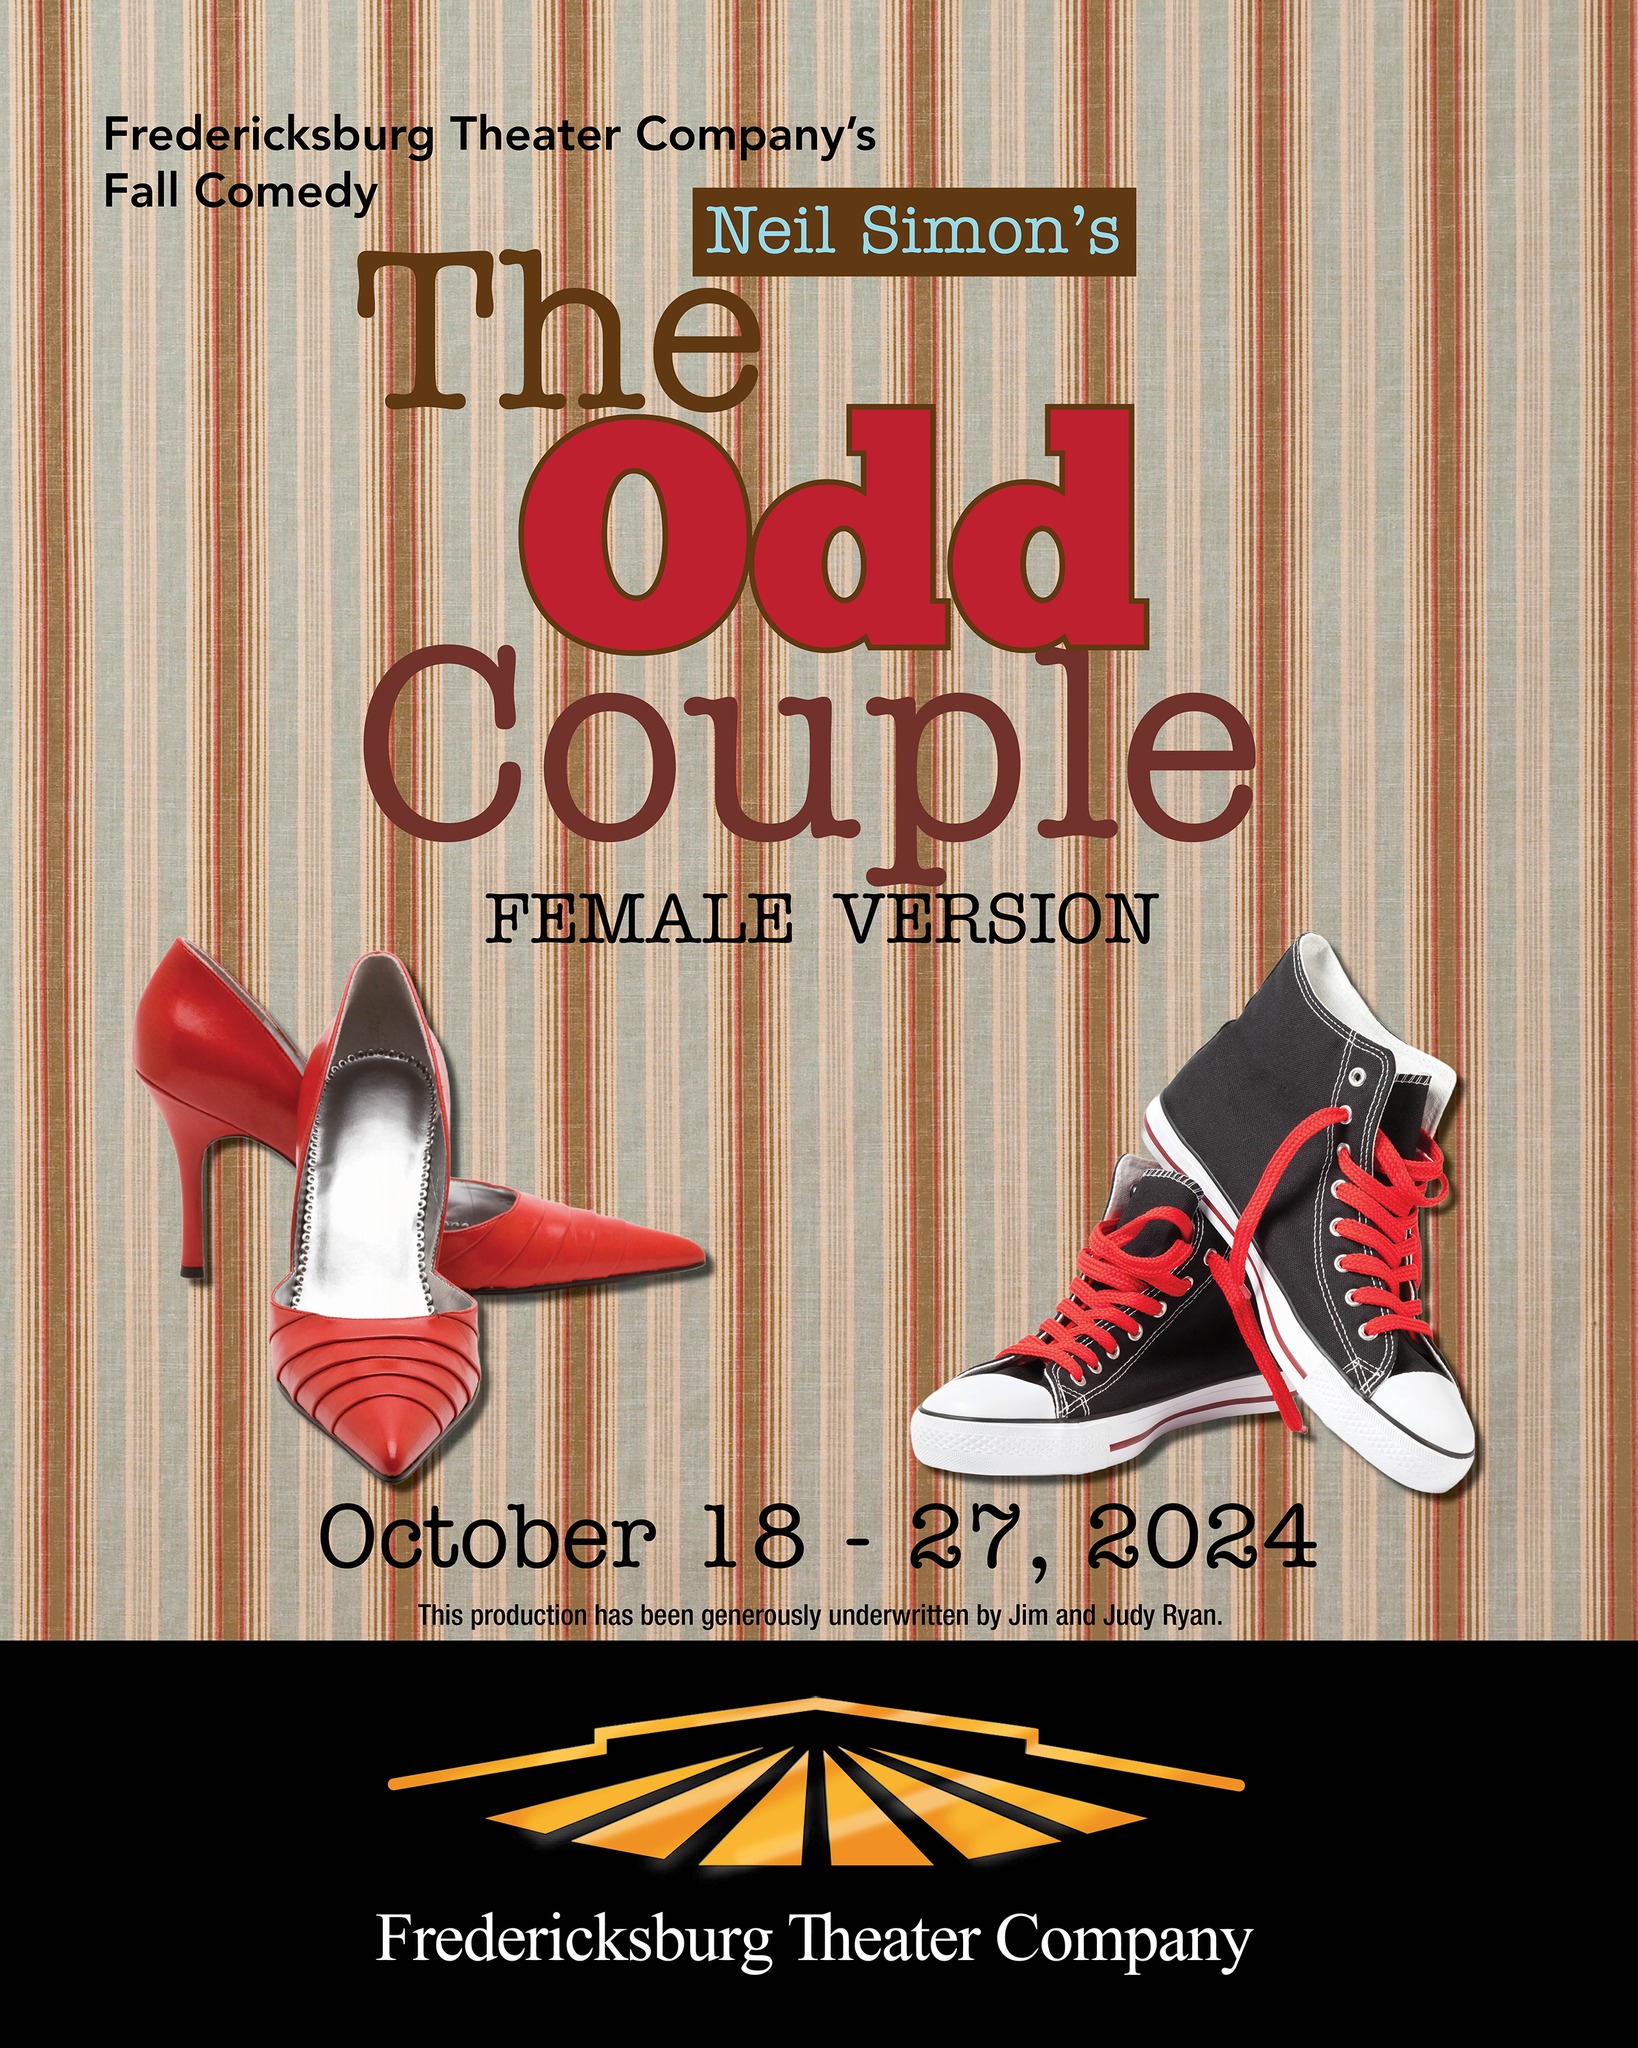 The Odd Couple - Female Version by Fredericksburg Theater Company (FTC)